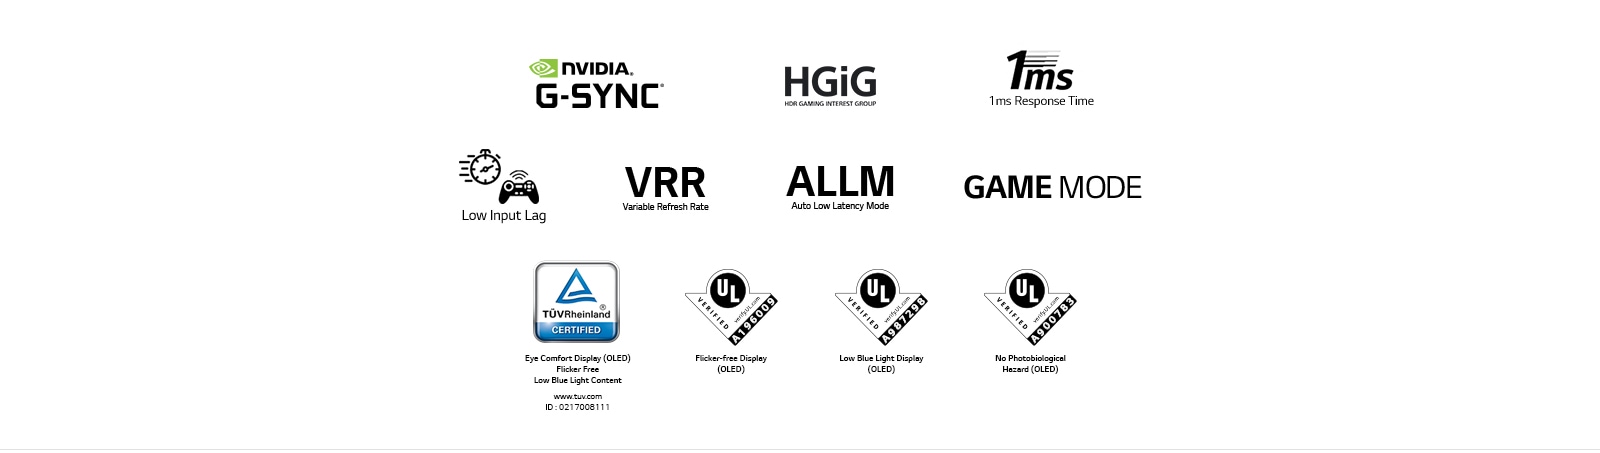 The mark of NVIDIA G-SYNC, The mark of HGiG, The mark of 1ms Response Time, The mark of Low Input lag, The mark of Variable Refresh Rate, The mark of Auto Low Latency Mode, The mark of GAME MODE, The mark of TÜV Rheinland, The mark of UL Verification